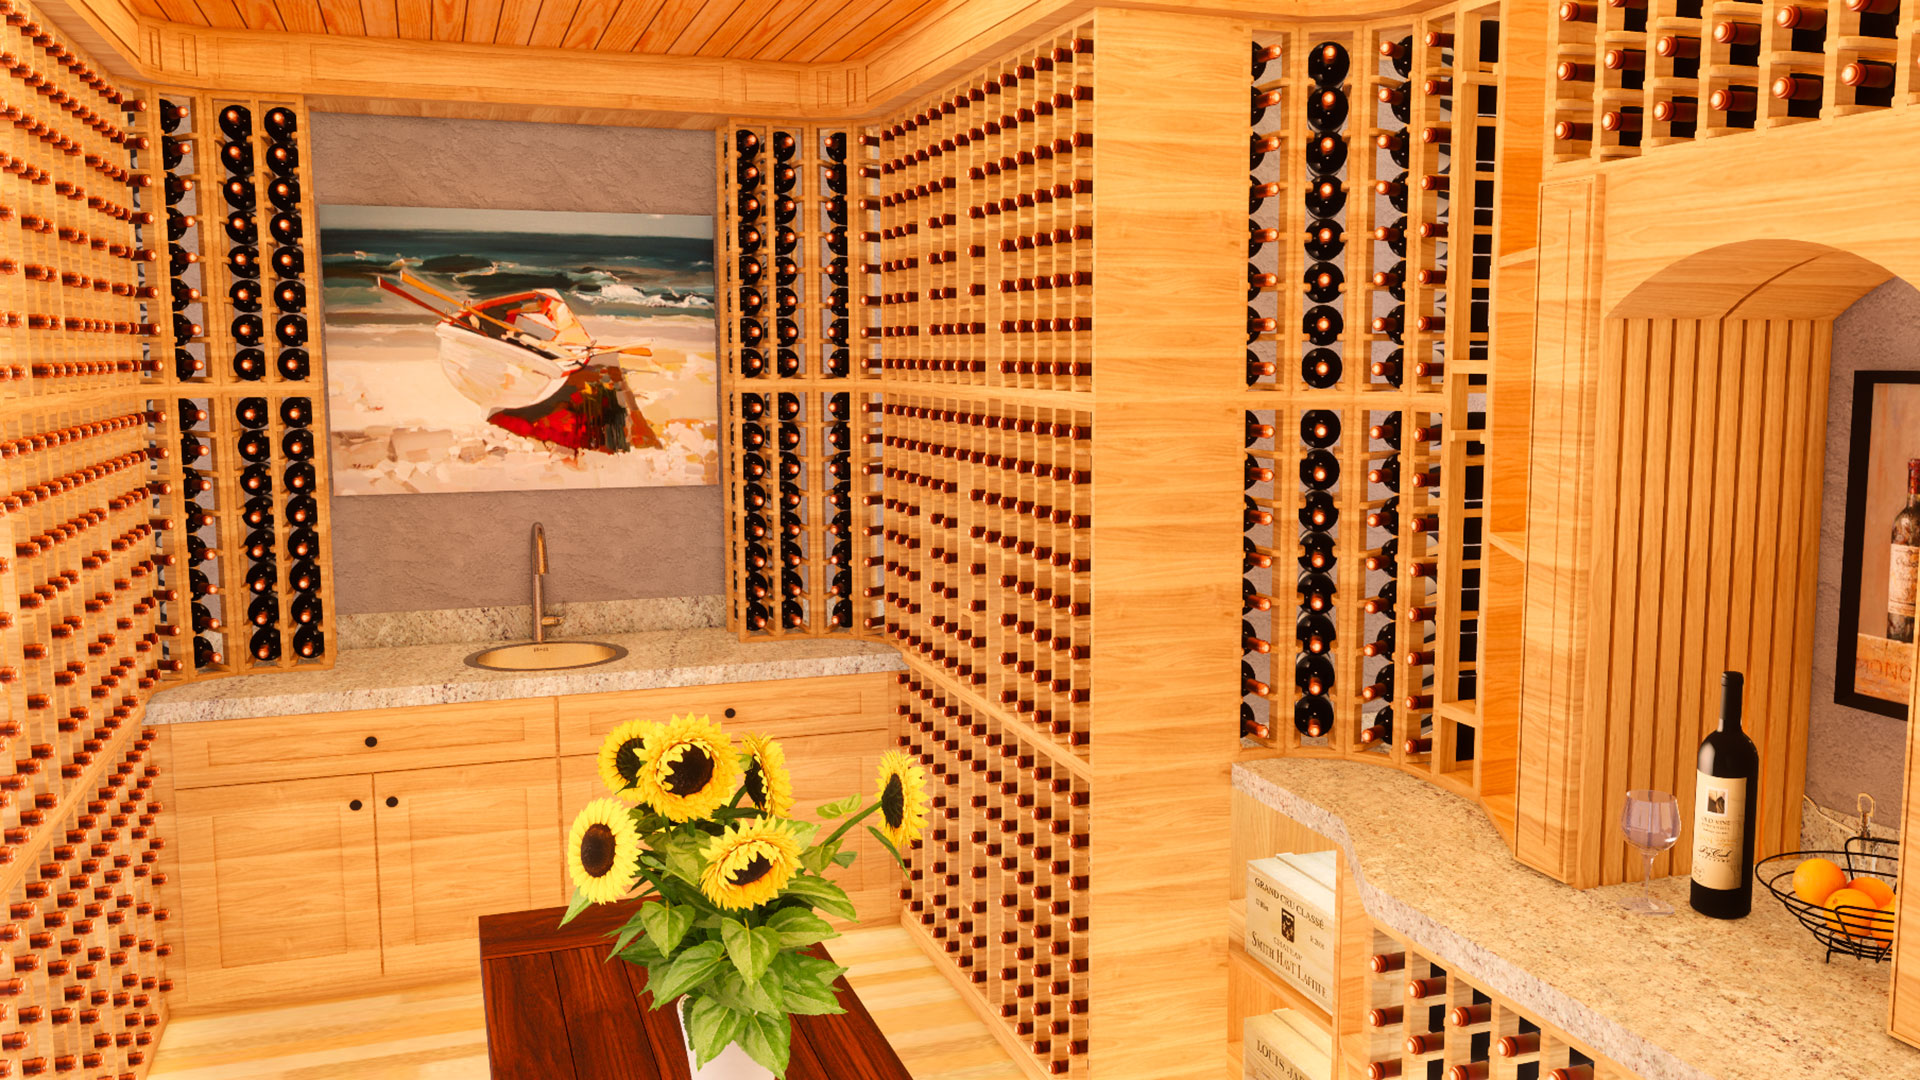 Under-deck wine storage with lots of options for storage, looking at back wall with painting above sink area